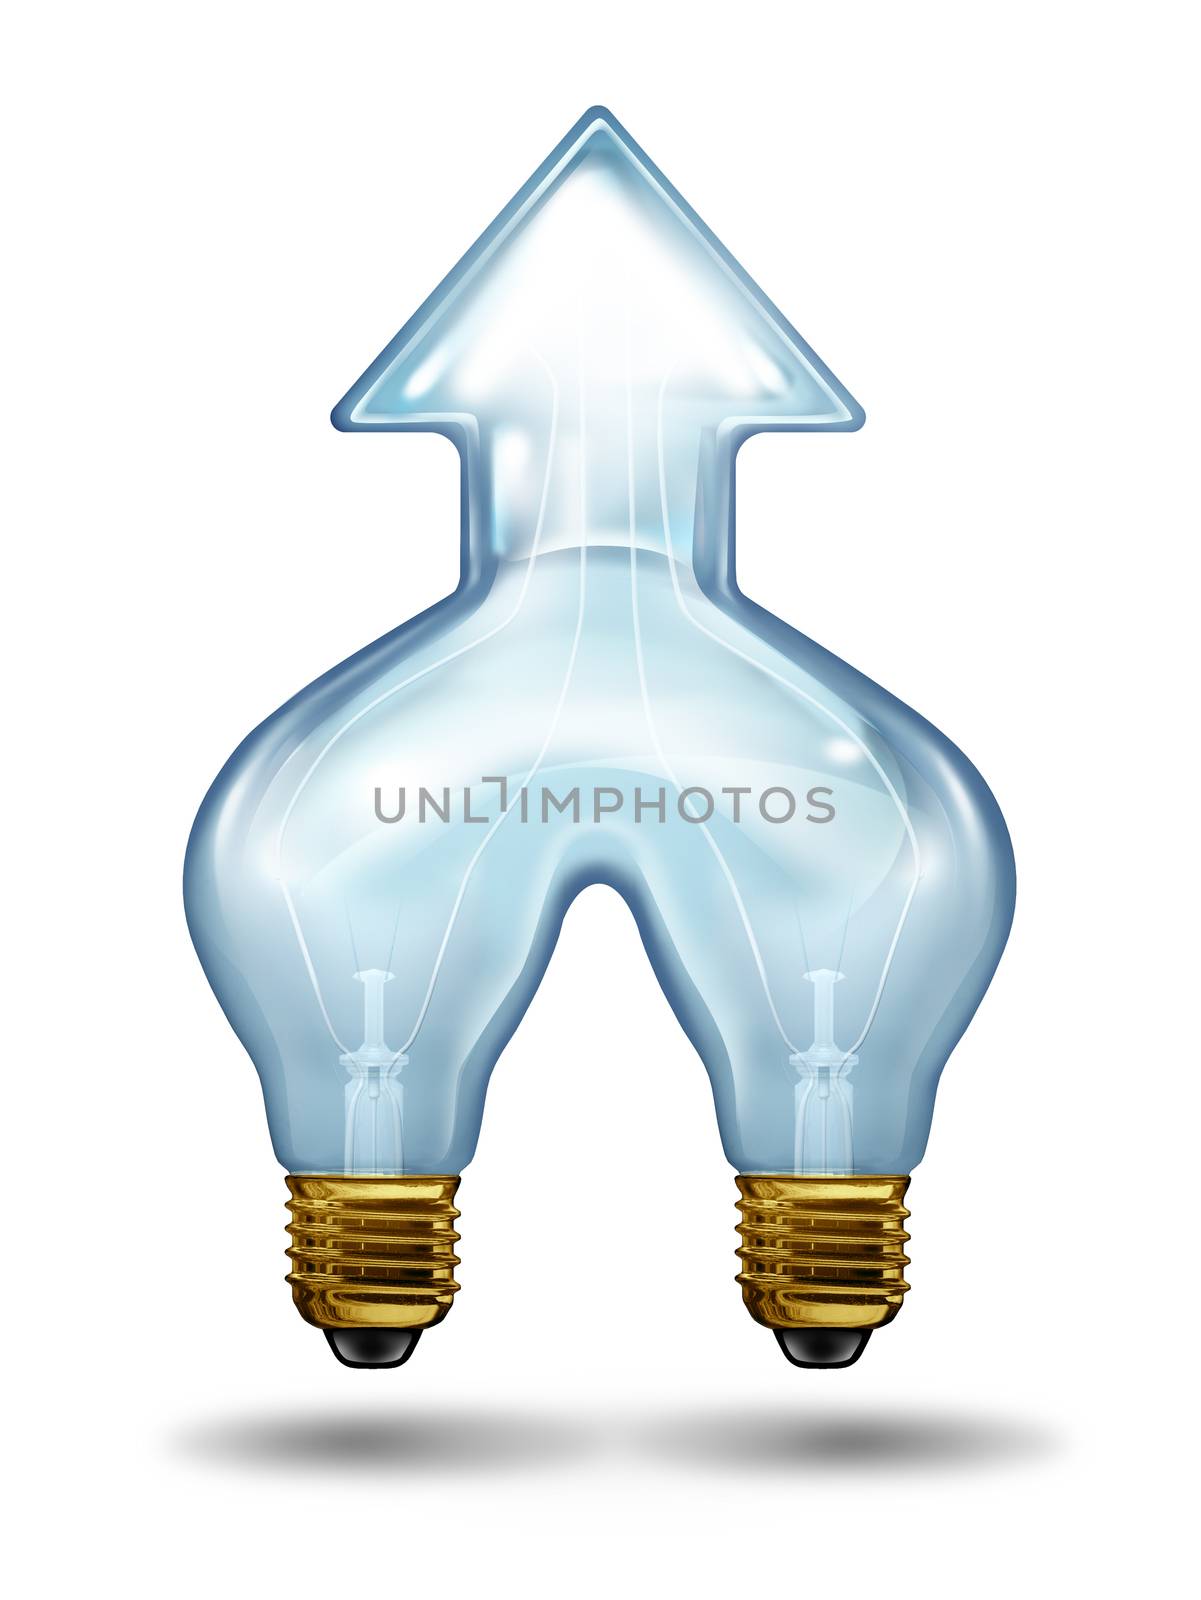 Creative success business concept for innovation cooperation with two high energy light bulb icons merged together forming a glass arrow shape going upward on a white background.